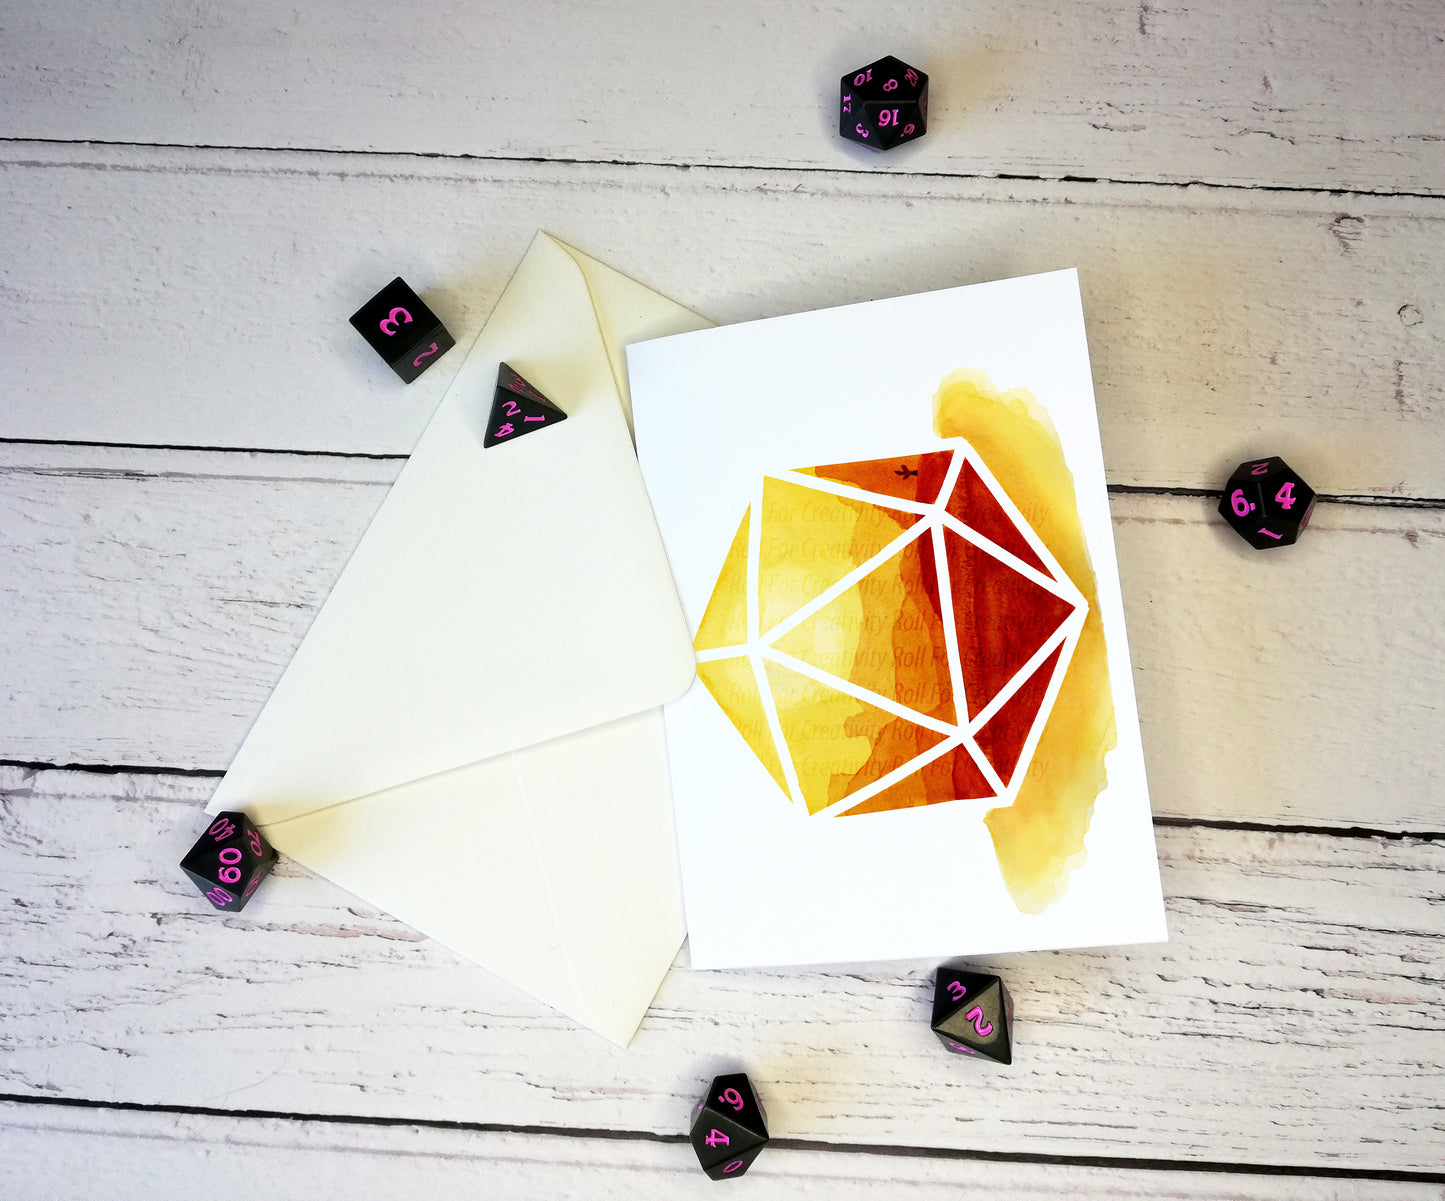 Watercolor D20 A6 Landscape Greetings Card BUNDLE  - Blank Inside for Custom Messages